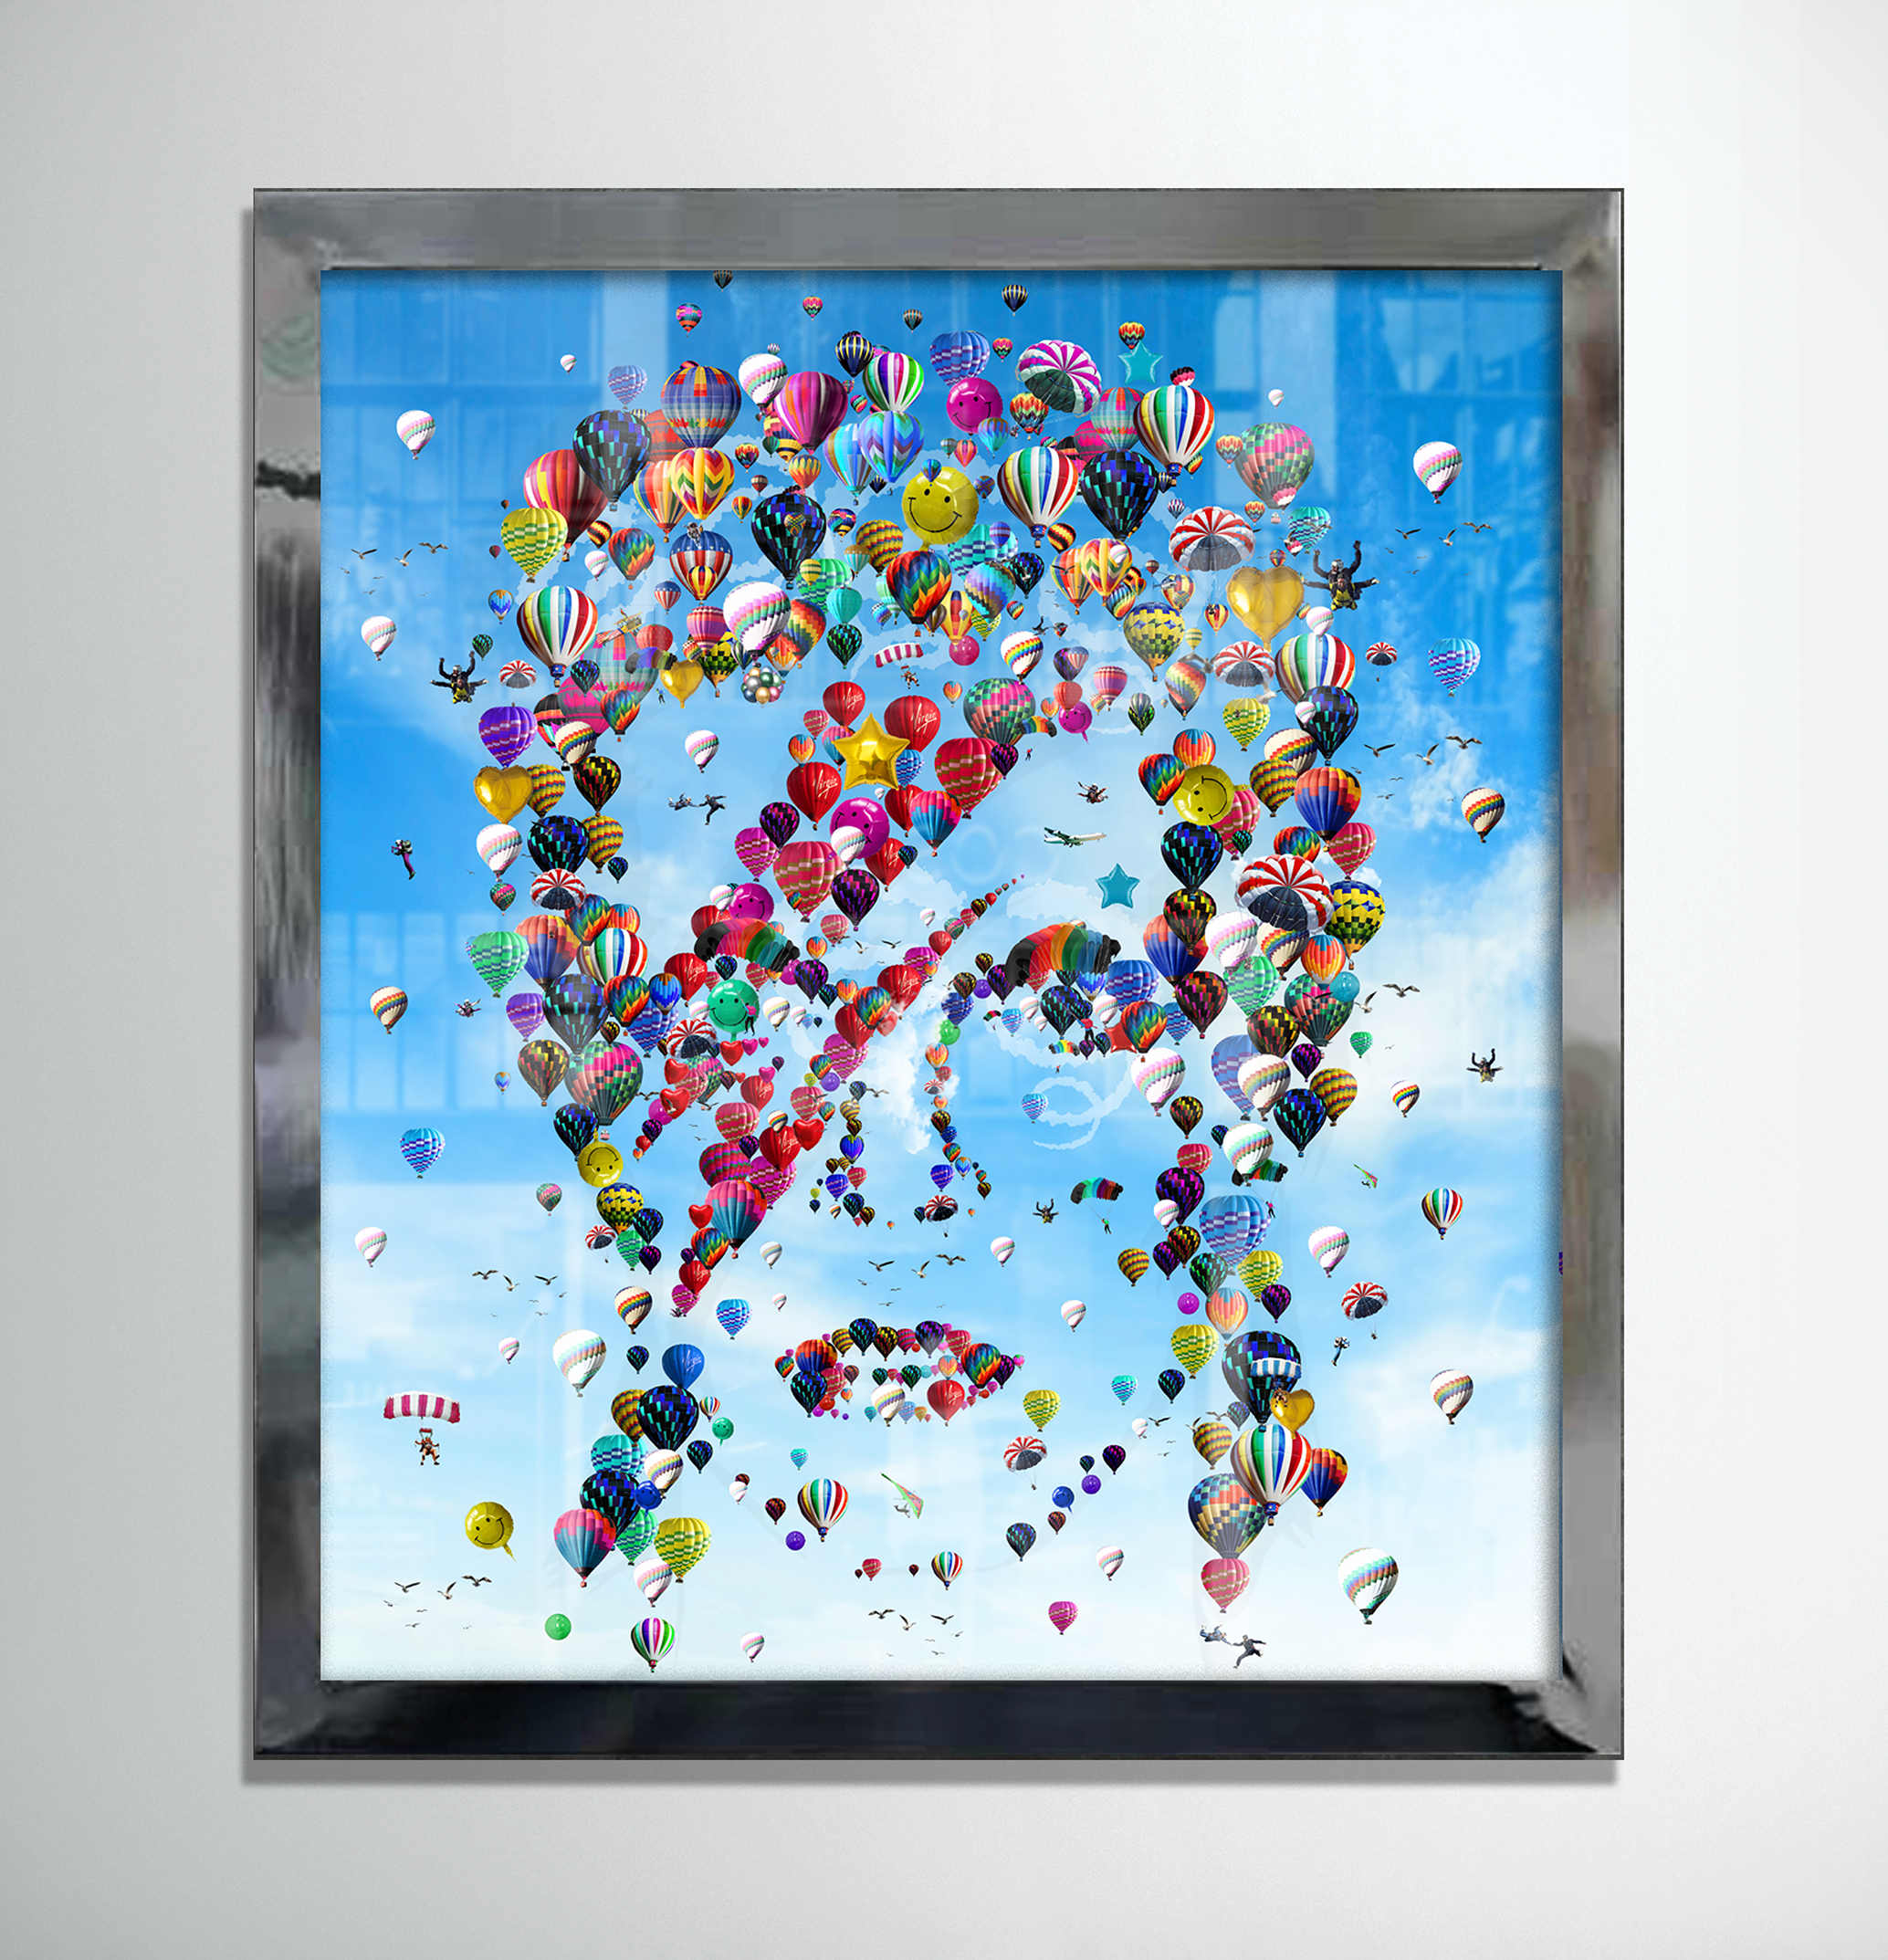 David Bowie Balloons by Iain Alexander | Mixed Media Original on Aluminum in Resin